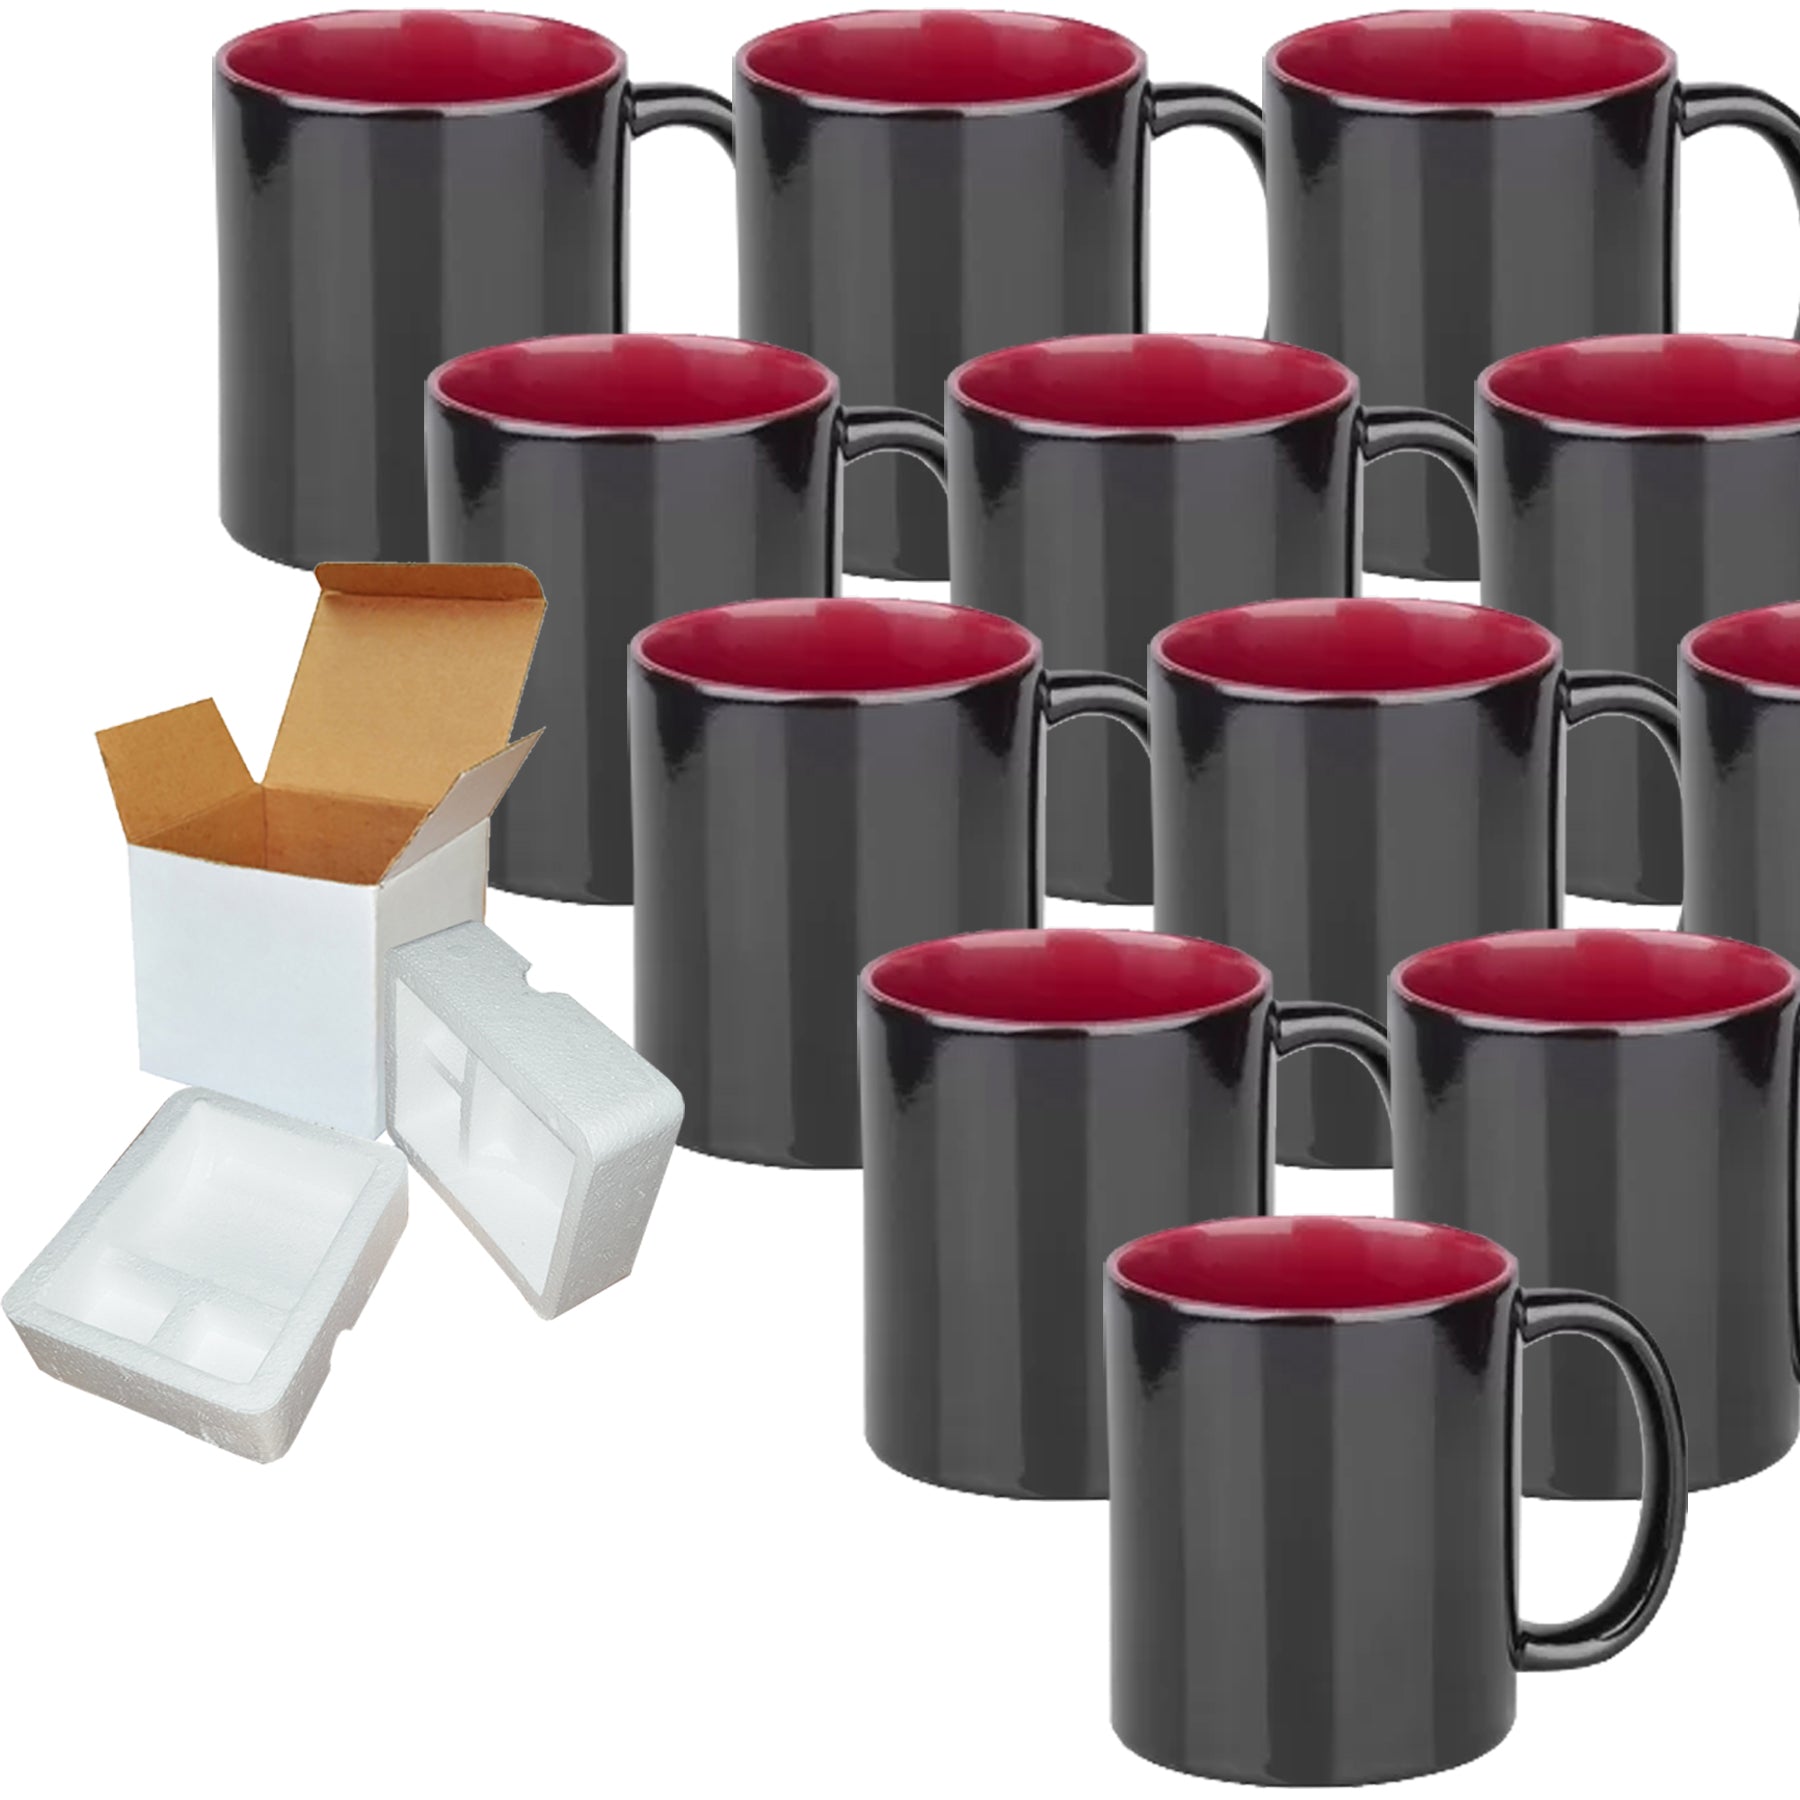 12-Pack Color Changing Sublimation Mugs - High-Quality Ceramic for  Sublimation Printing - Mugsie